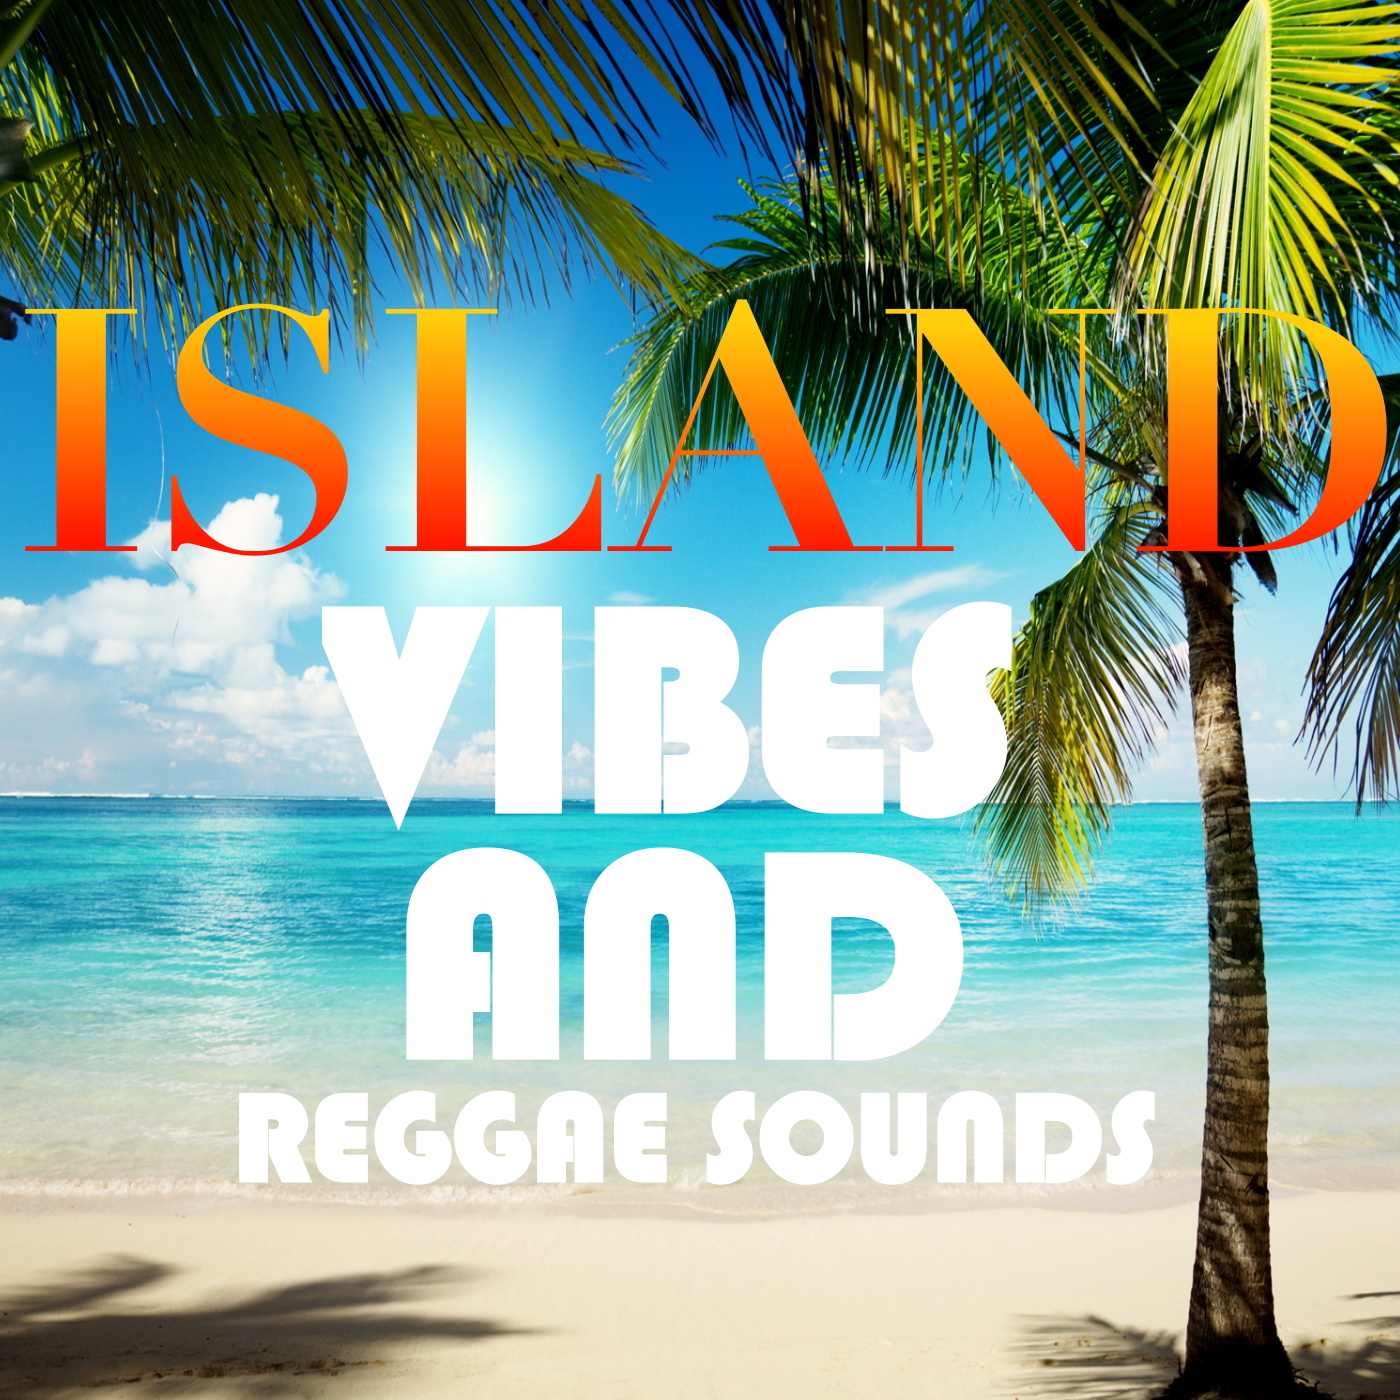 Island Vibes And Reggae Sounds